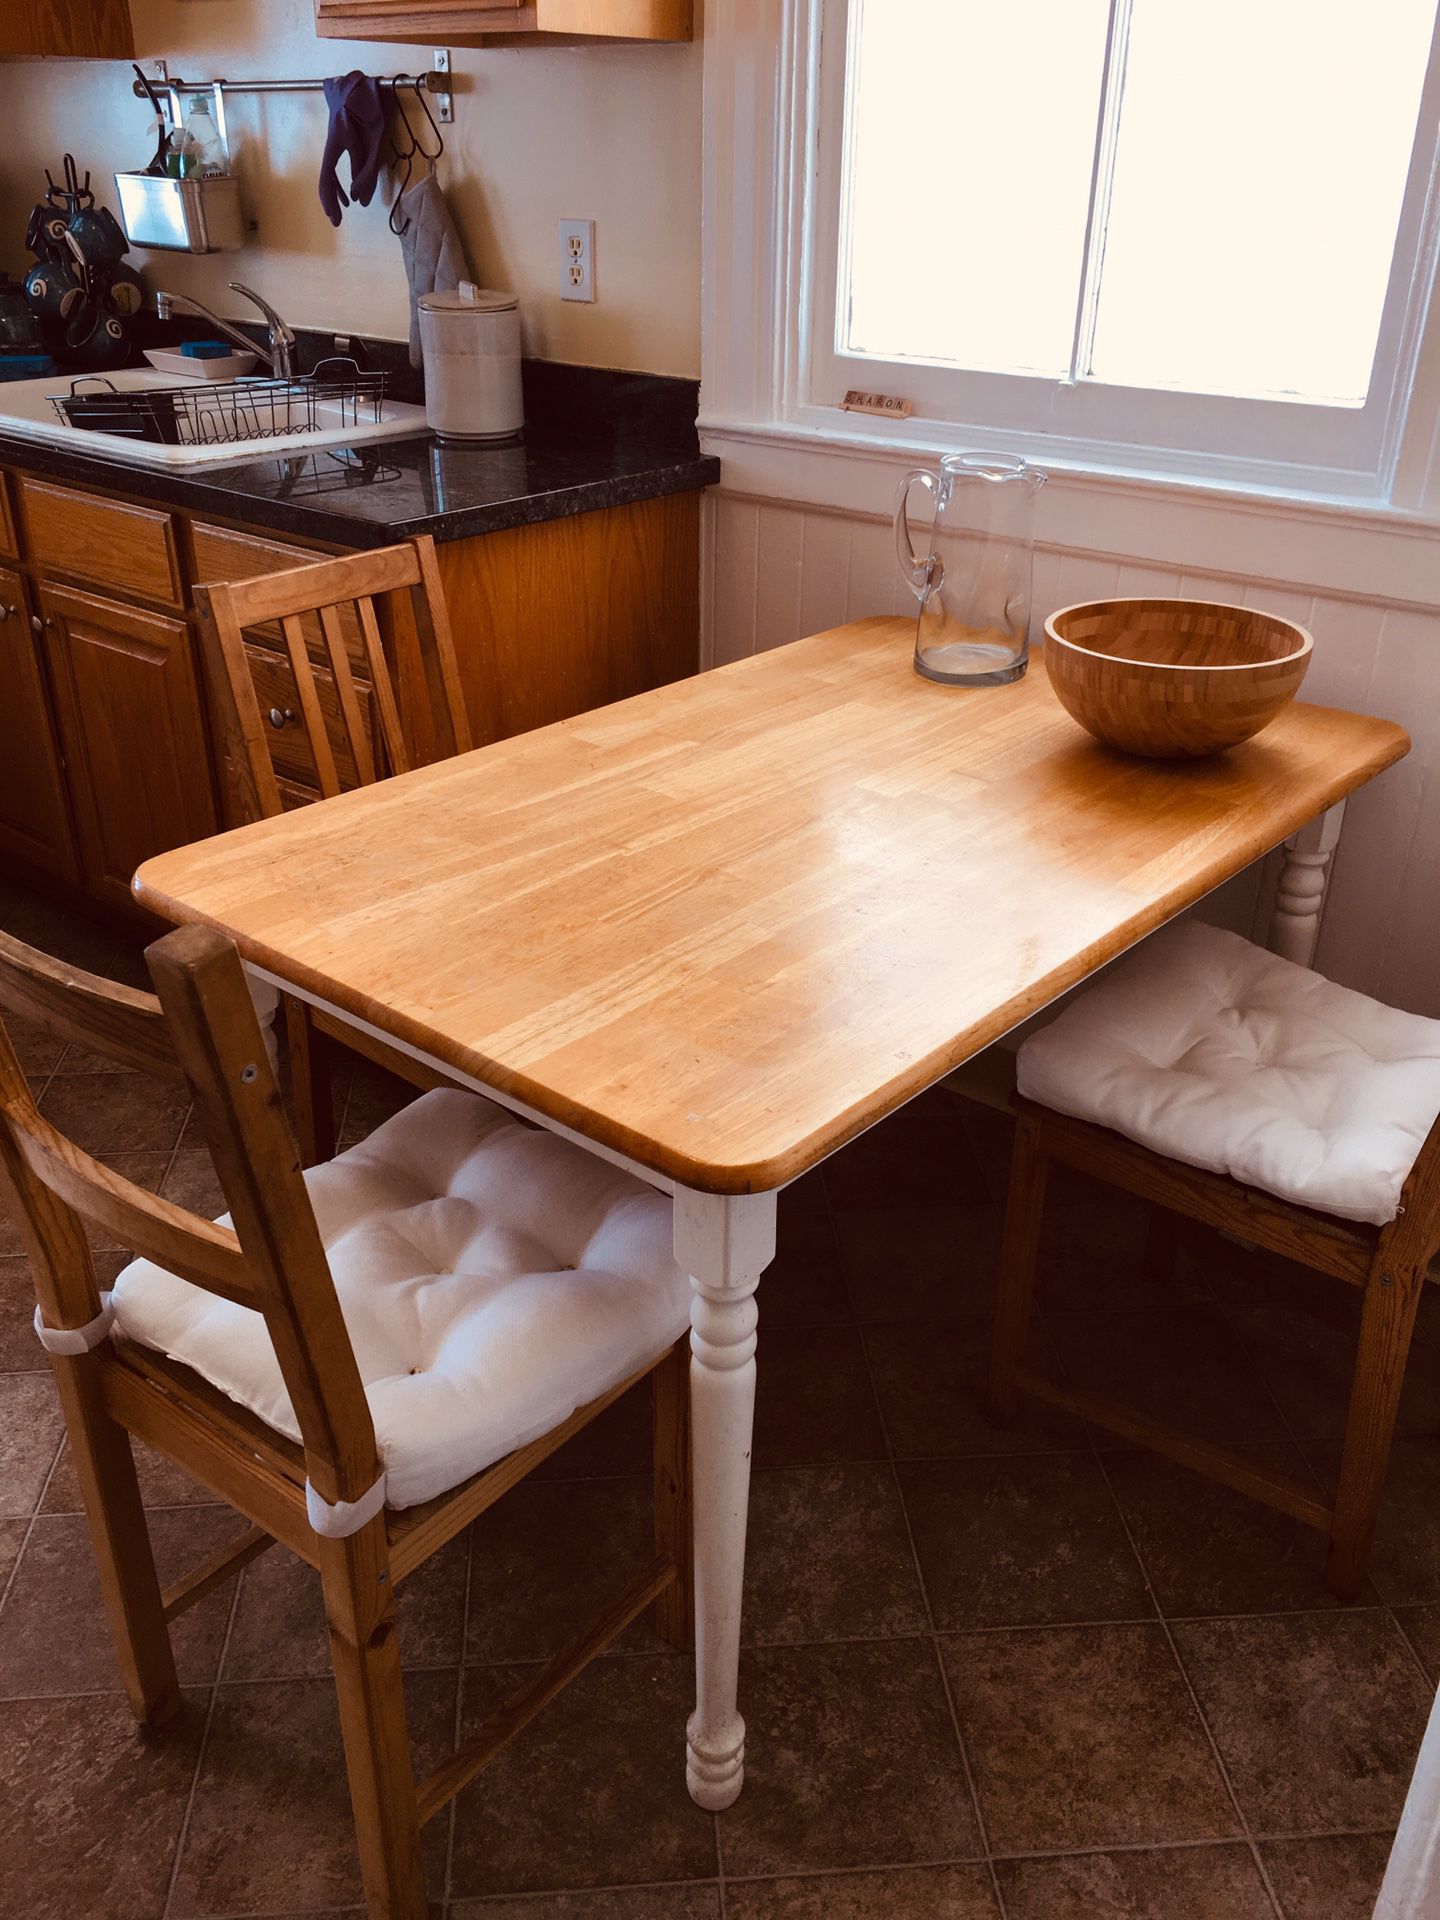 FREE Basic kitchen table and chairs